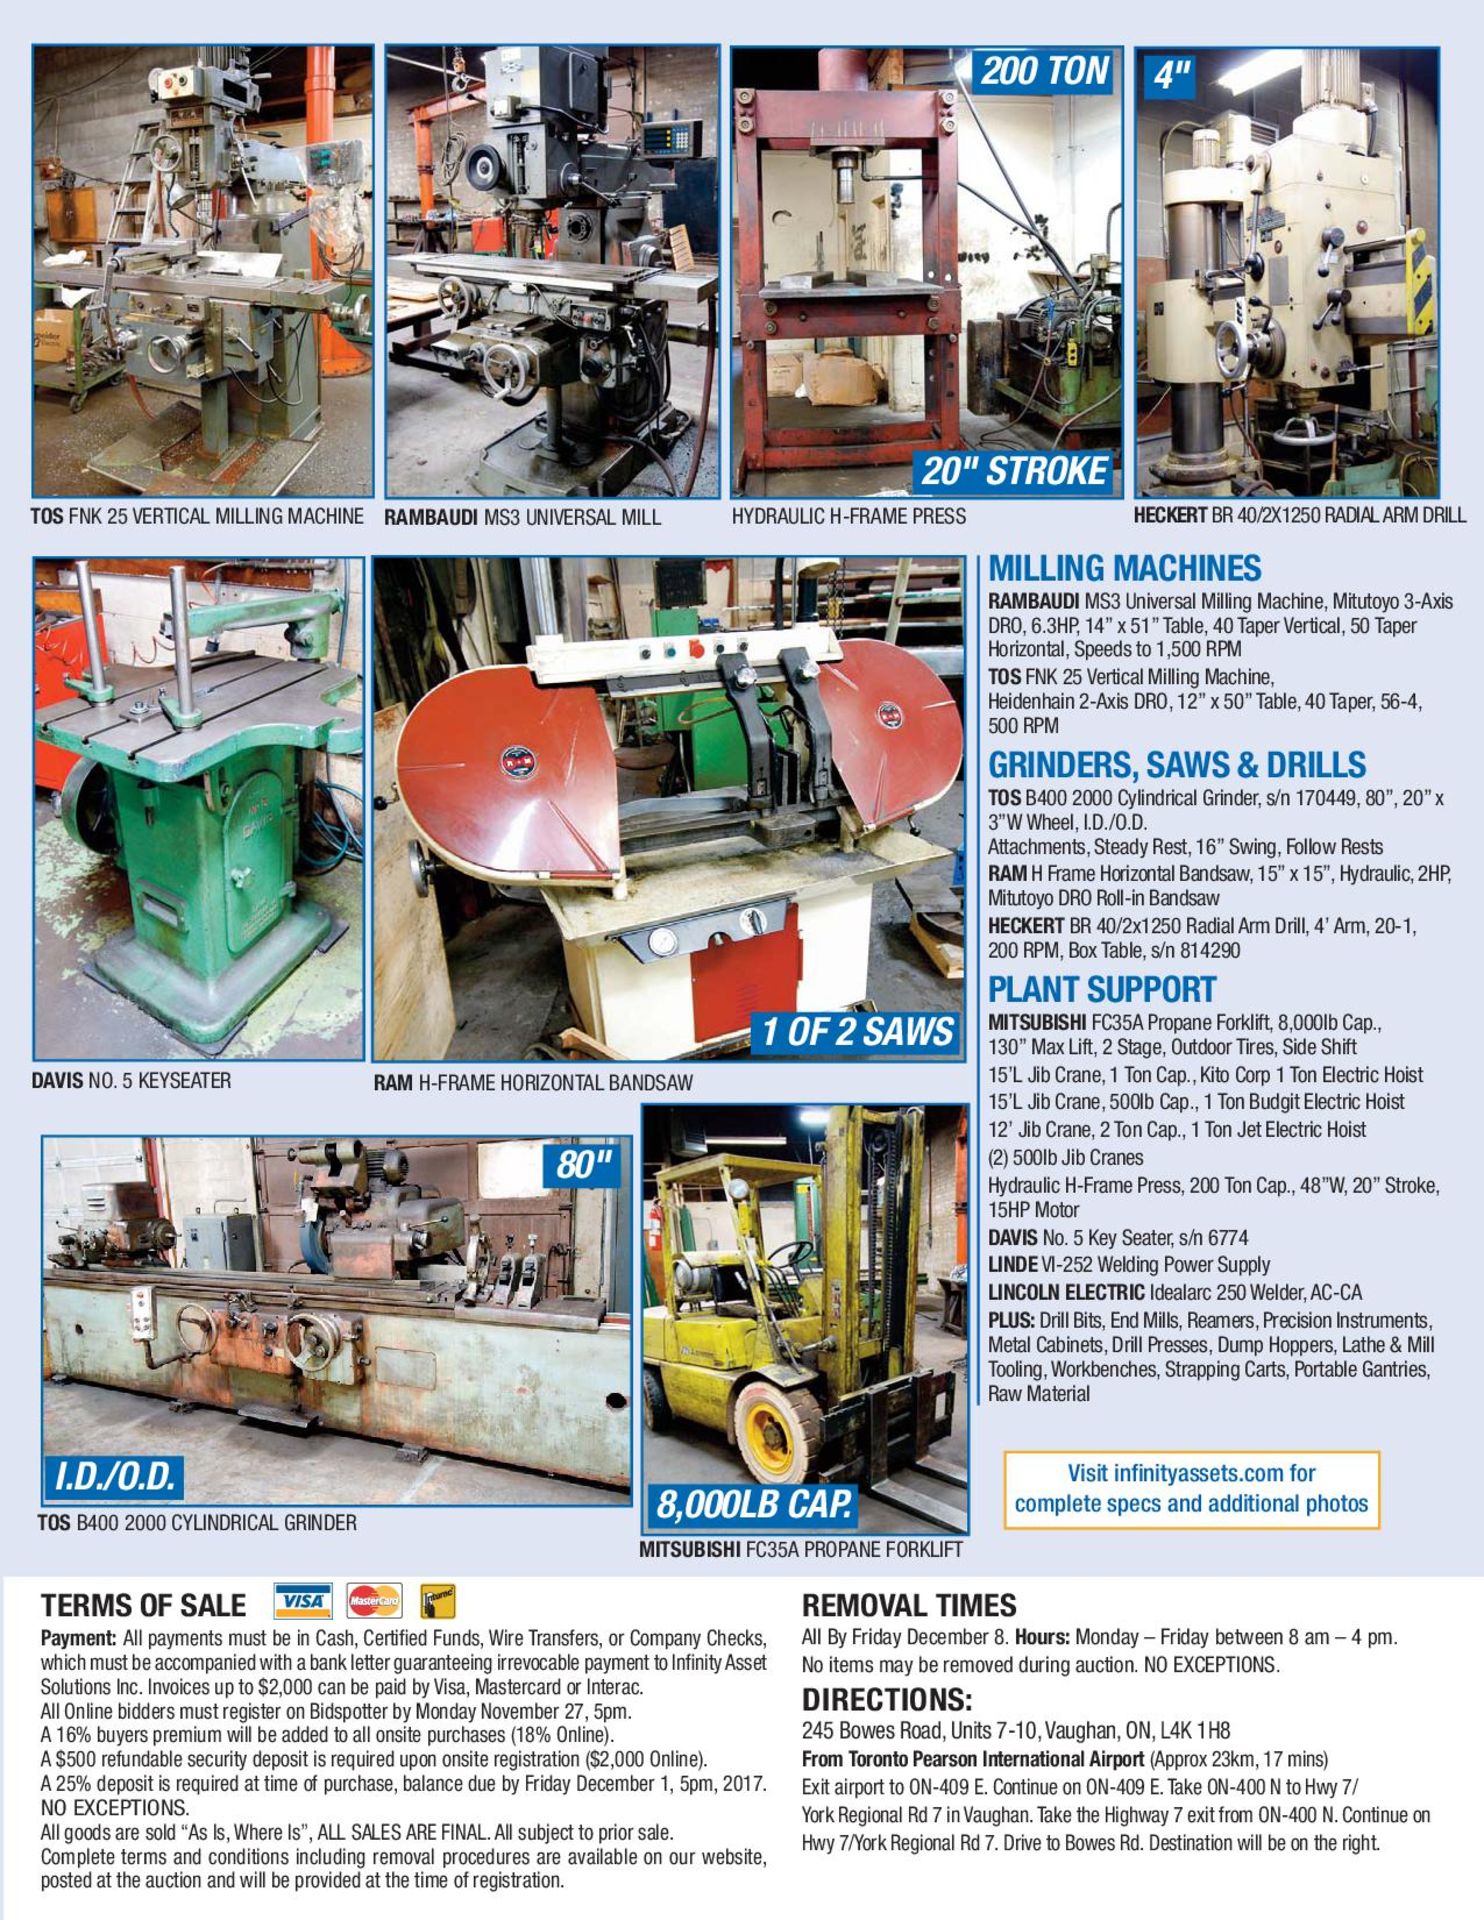 Full Catalog Coming Soon! Canian Precision Machine Shop - Image 4 of 4